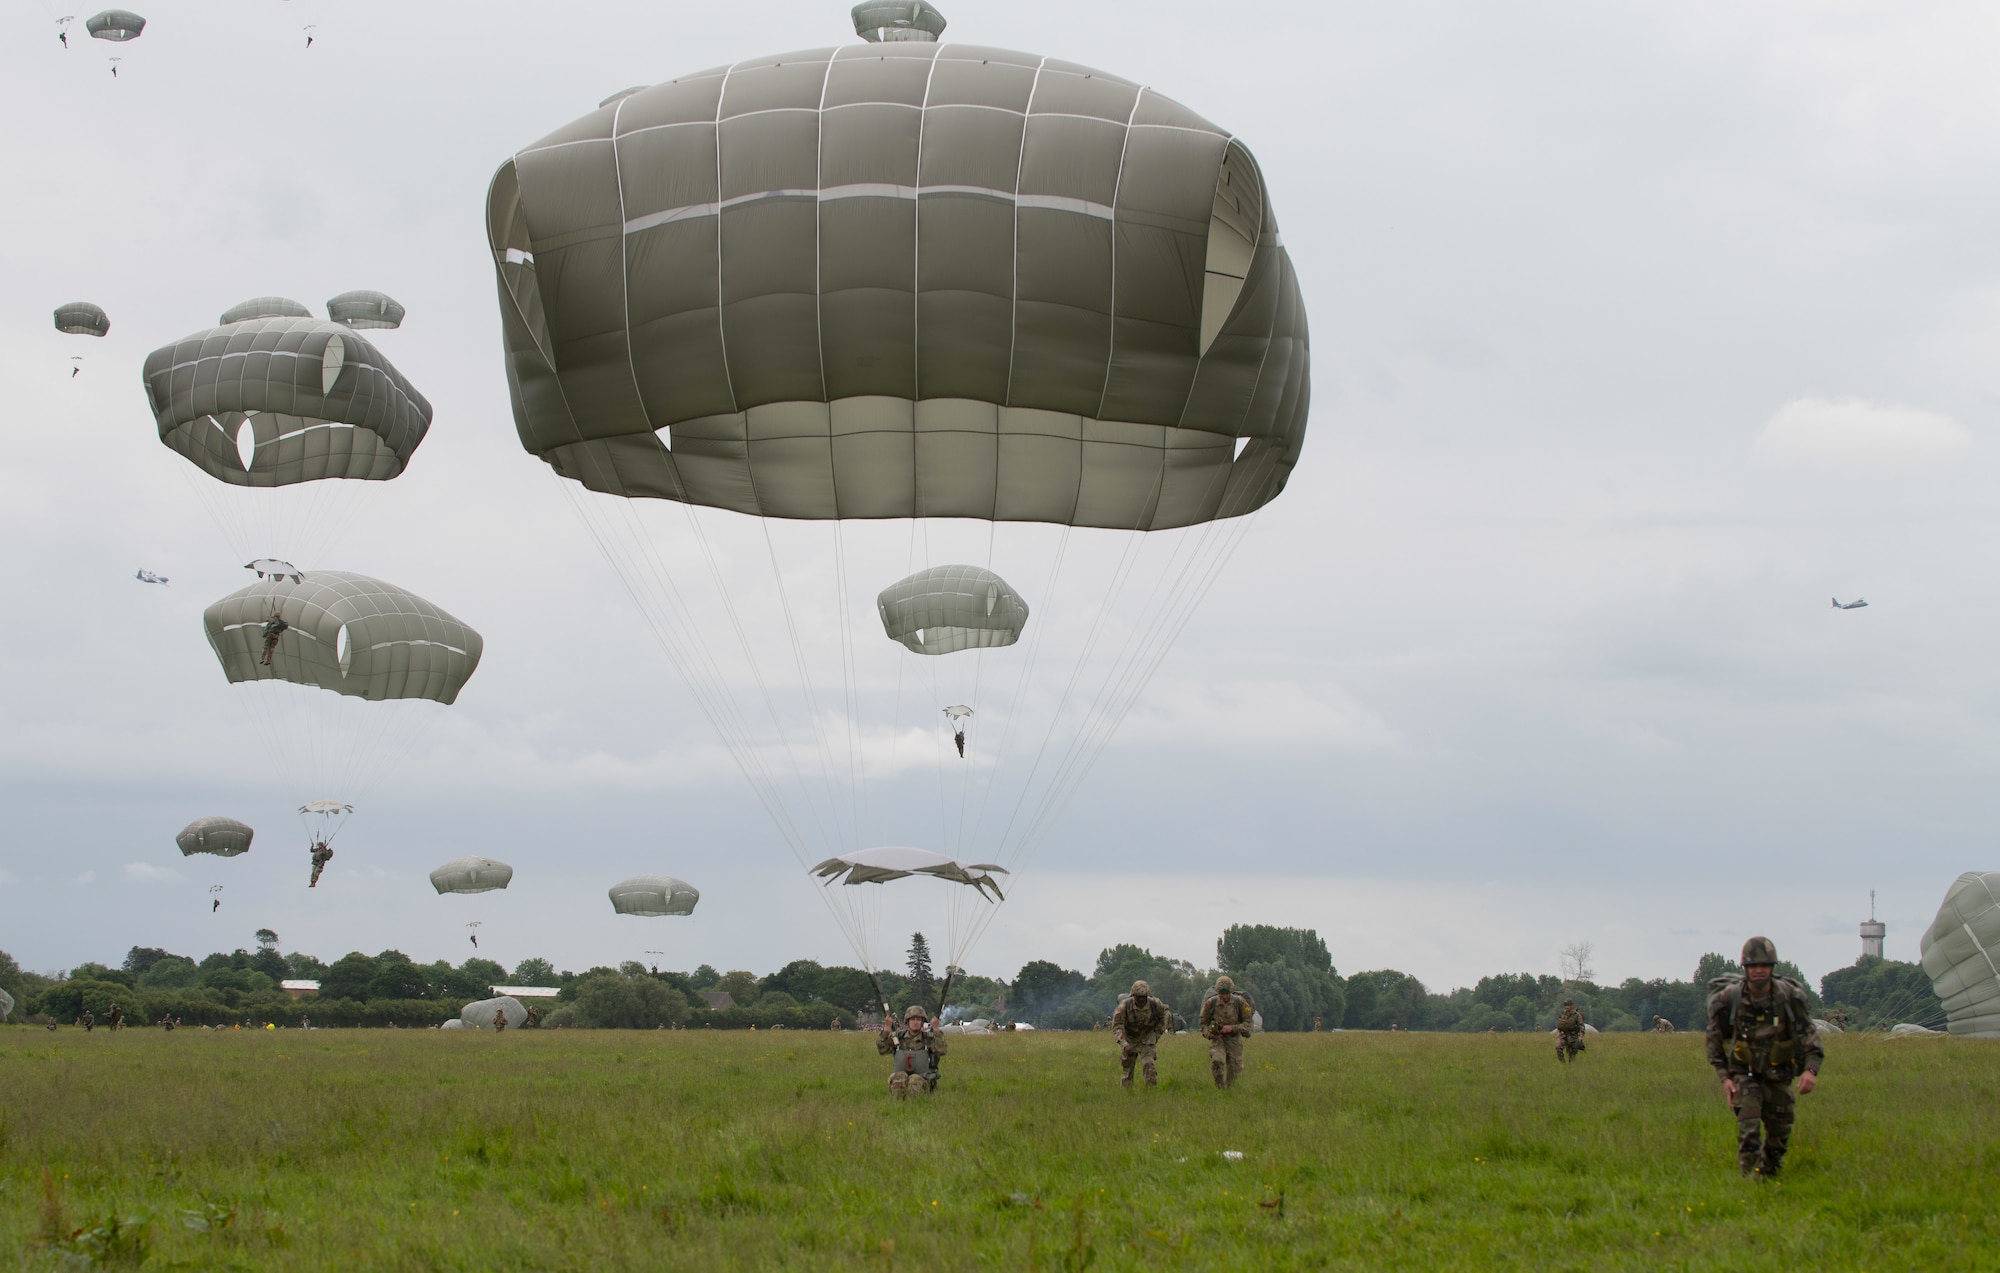 More than 1,100 parachutes sailed above Sainte-Mere-Eglise, France, to commemorate the 75th Anniversary of D-Day June 9, 2019. Nineteen aircraft from multiple nations and parachute jumpers from Belgium, France, Germany, the Netherlands, Romania, United Kingdom and the United States dropped civilians and Soldiers in front of thousands of spectators. (U.S. Air Force photo by Airman 1st Class Jennifer Zima)